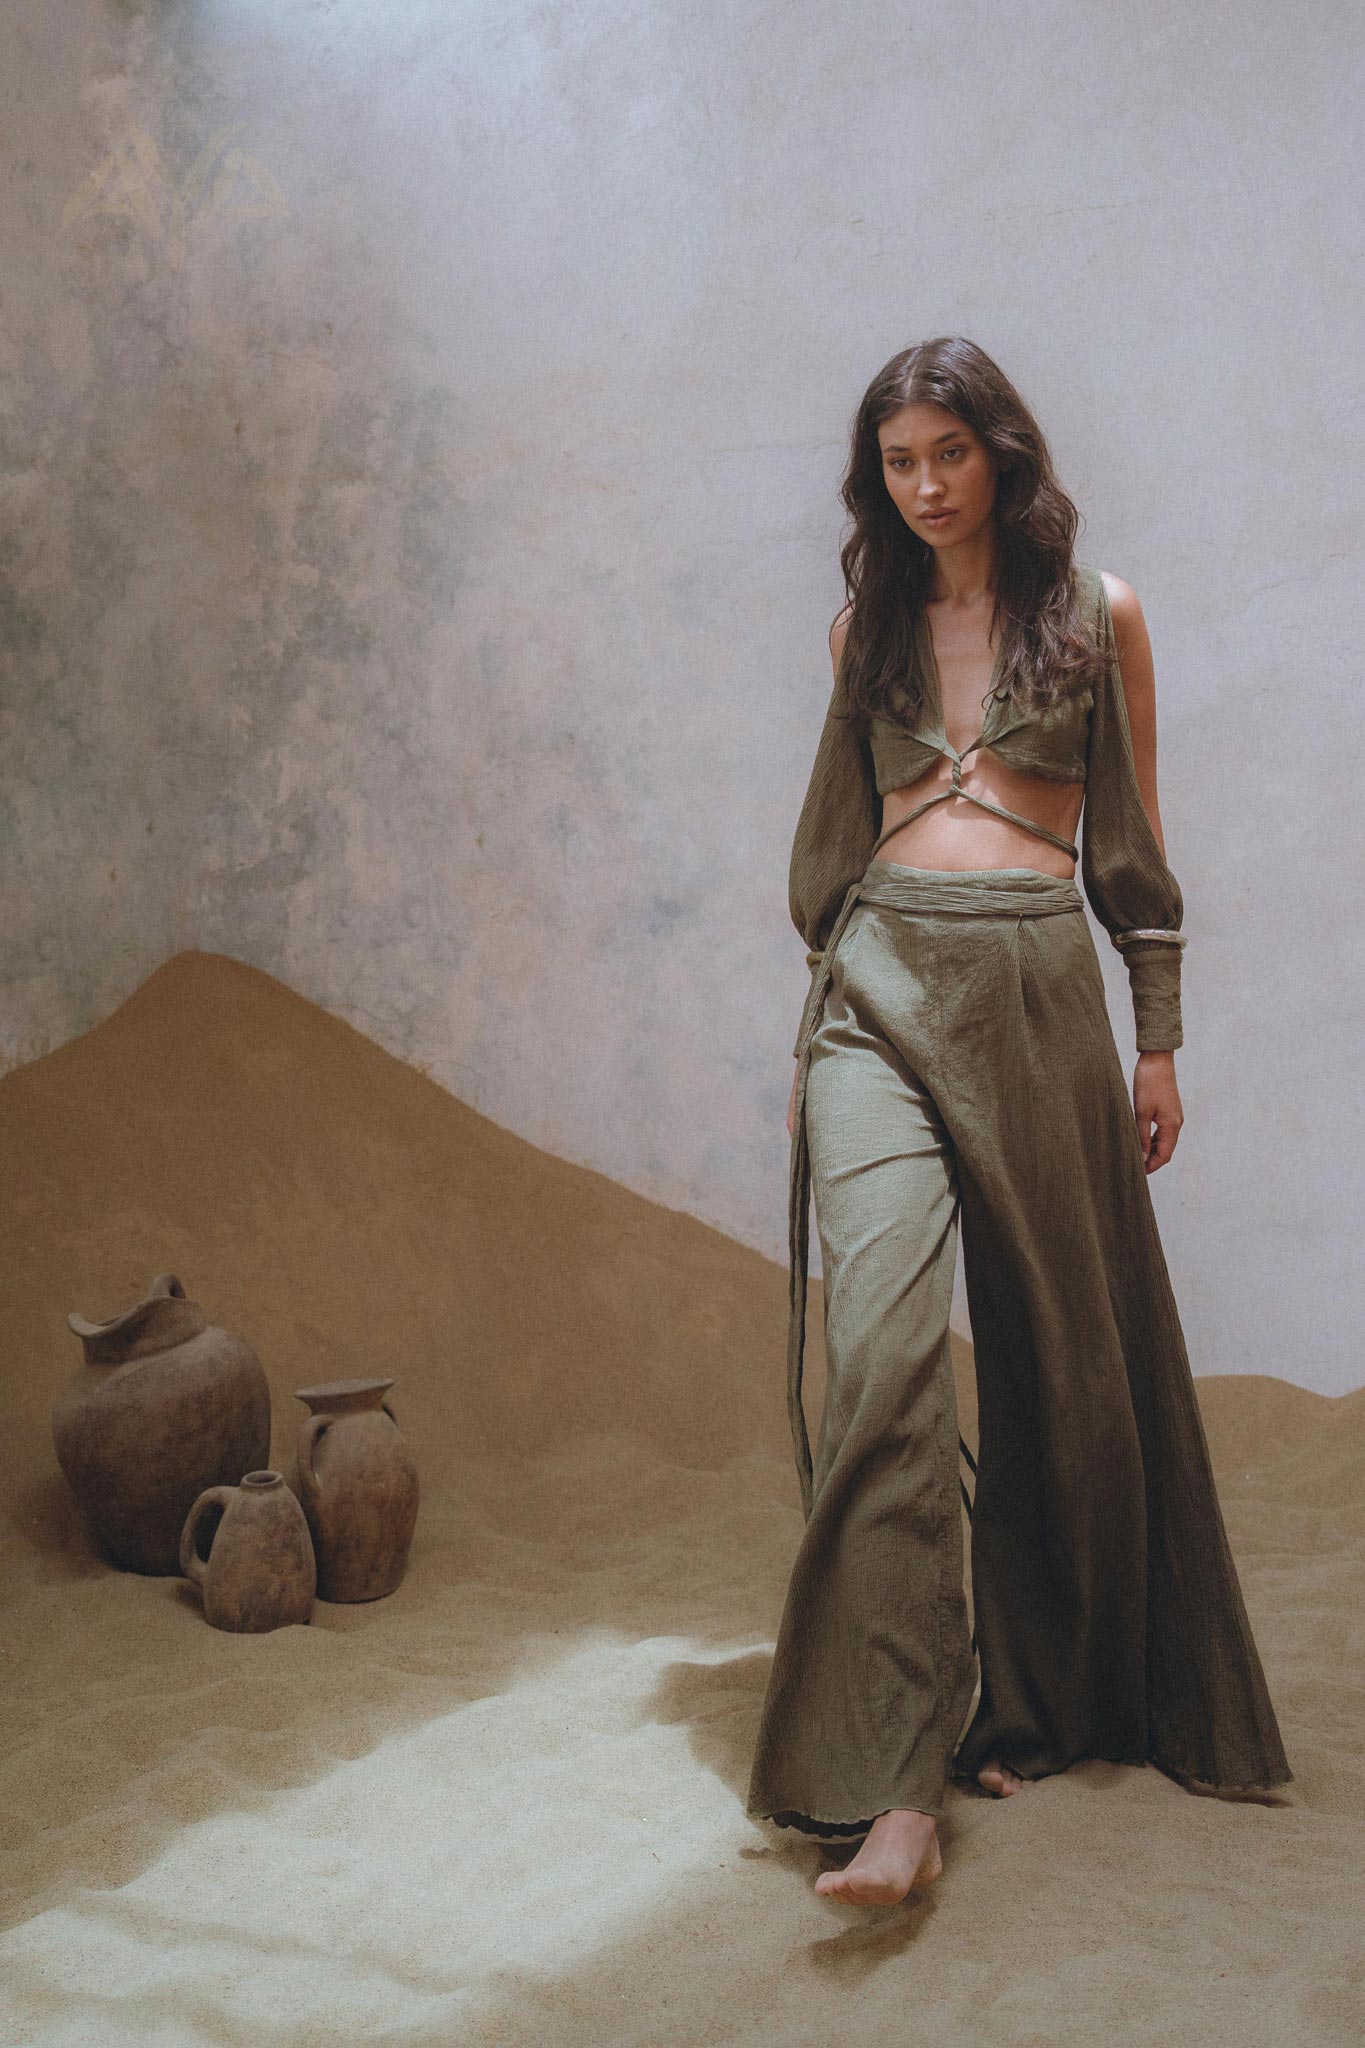 Get the perfect look with Aya Sacred Wear's Sage Green Boho Crop Top and Pants.